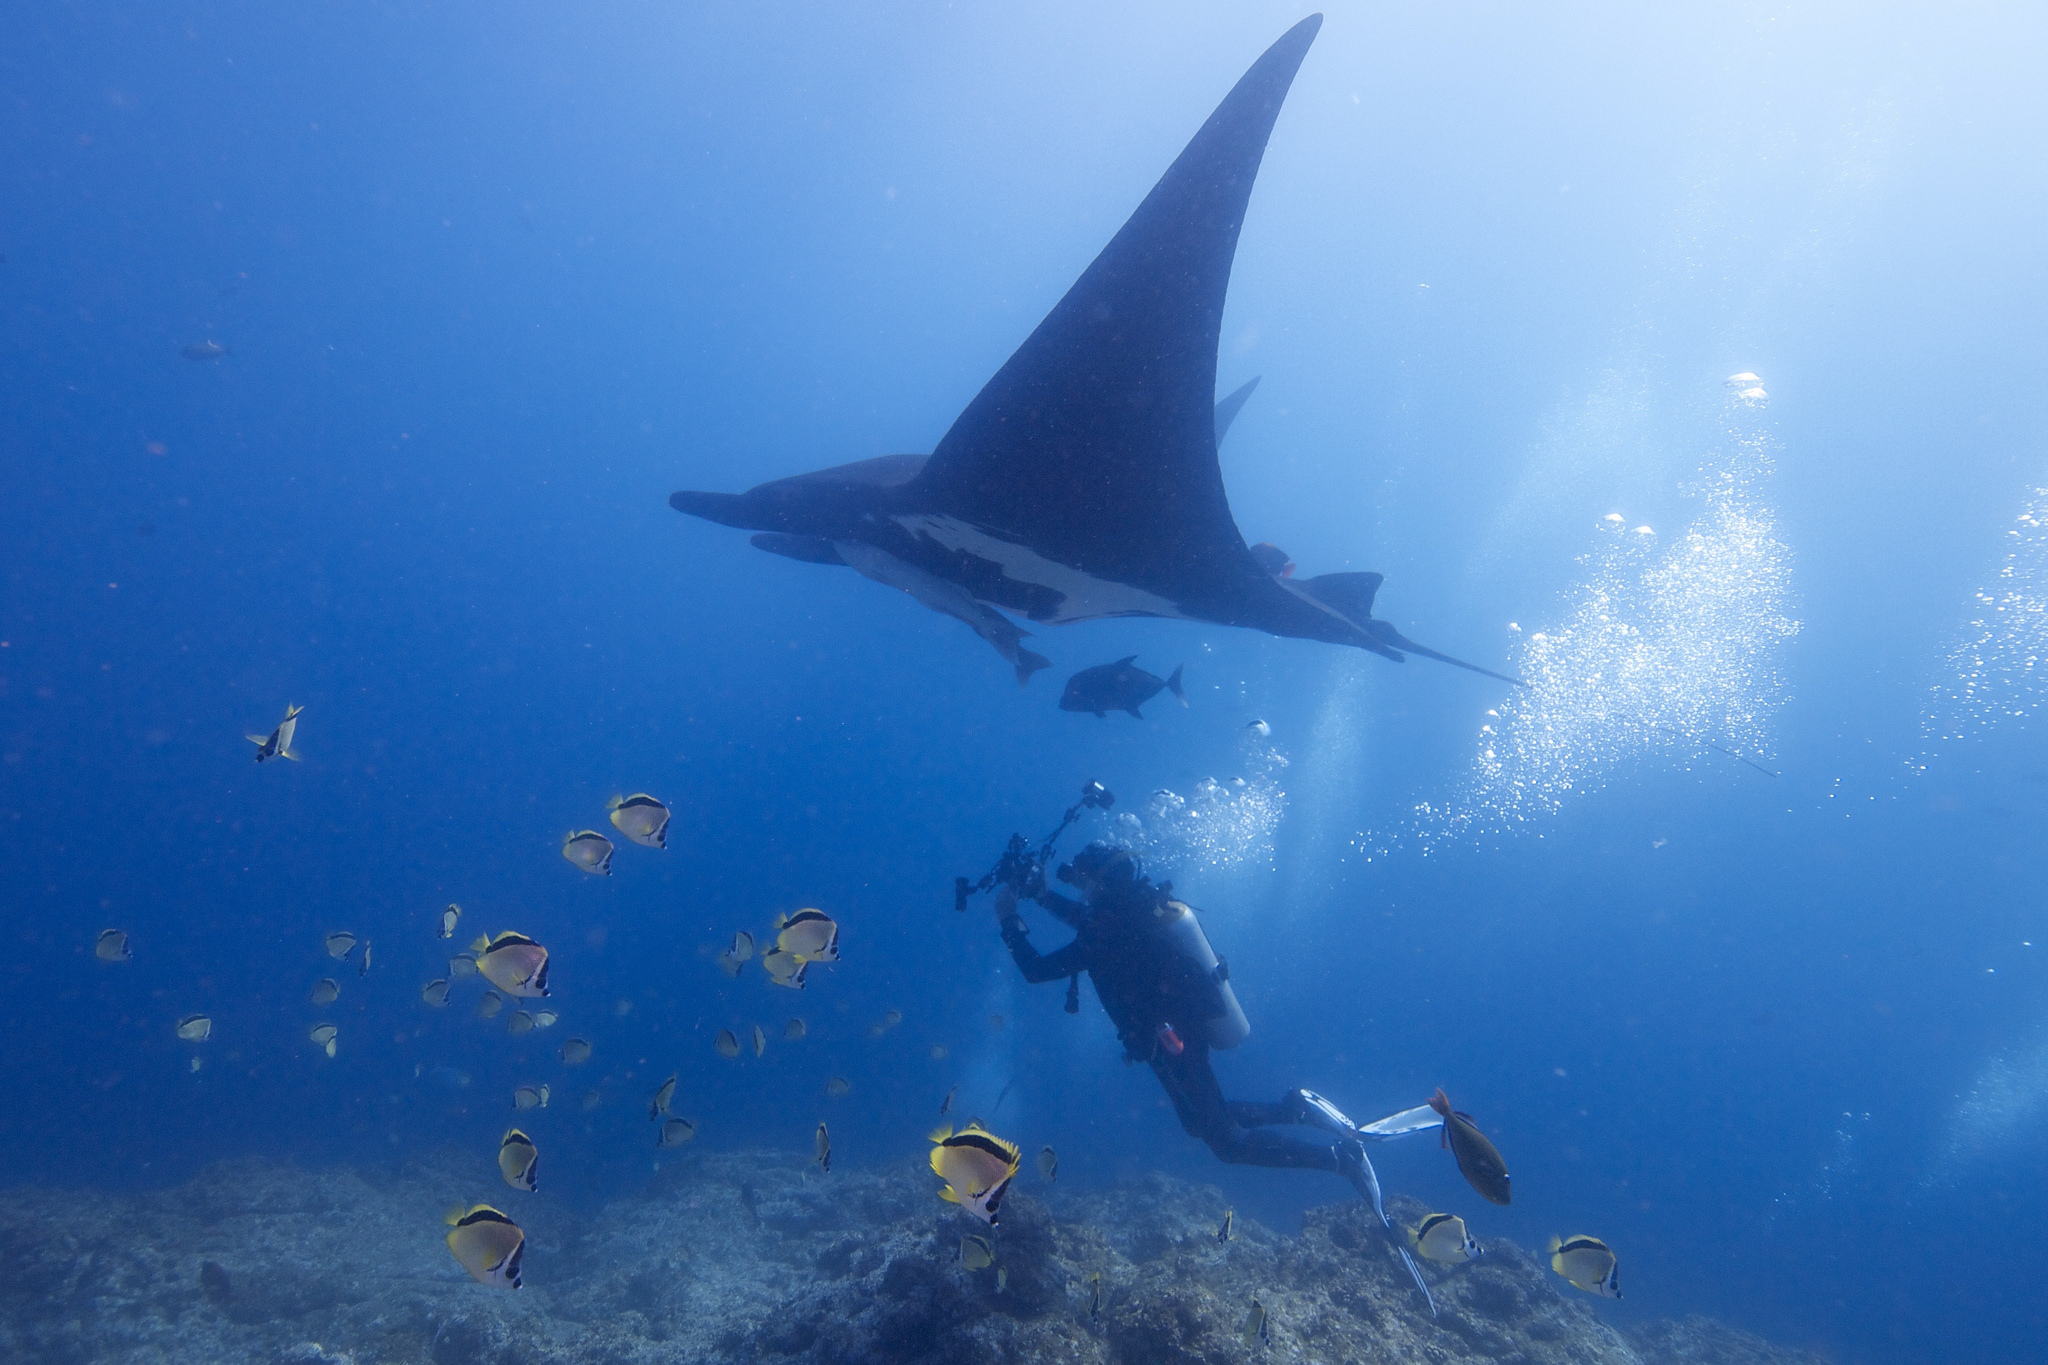 Diving with a manta ray